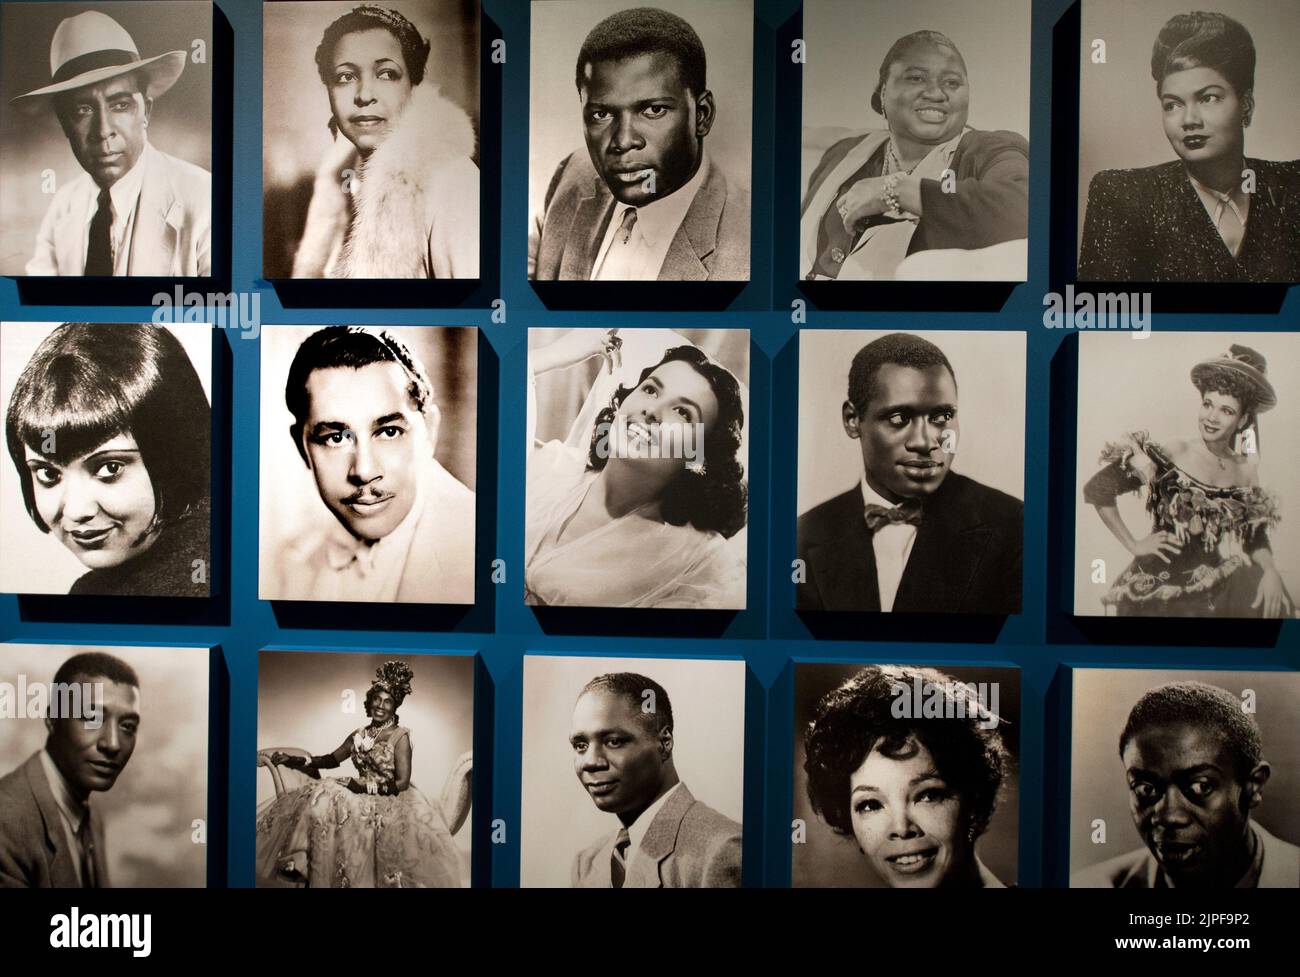 Vintage actors headshots on display in the exhibtion 'Regeneration: Black Cinema' at the Academy Museum of Motion Pictures in Los Angeles, California Stock Photo